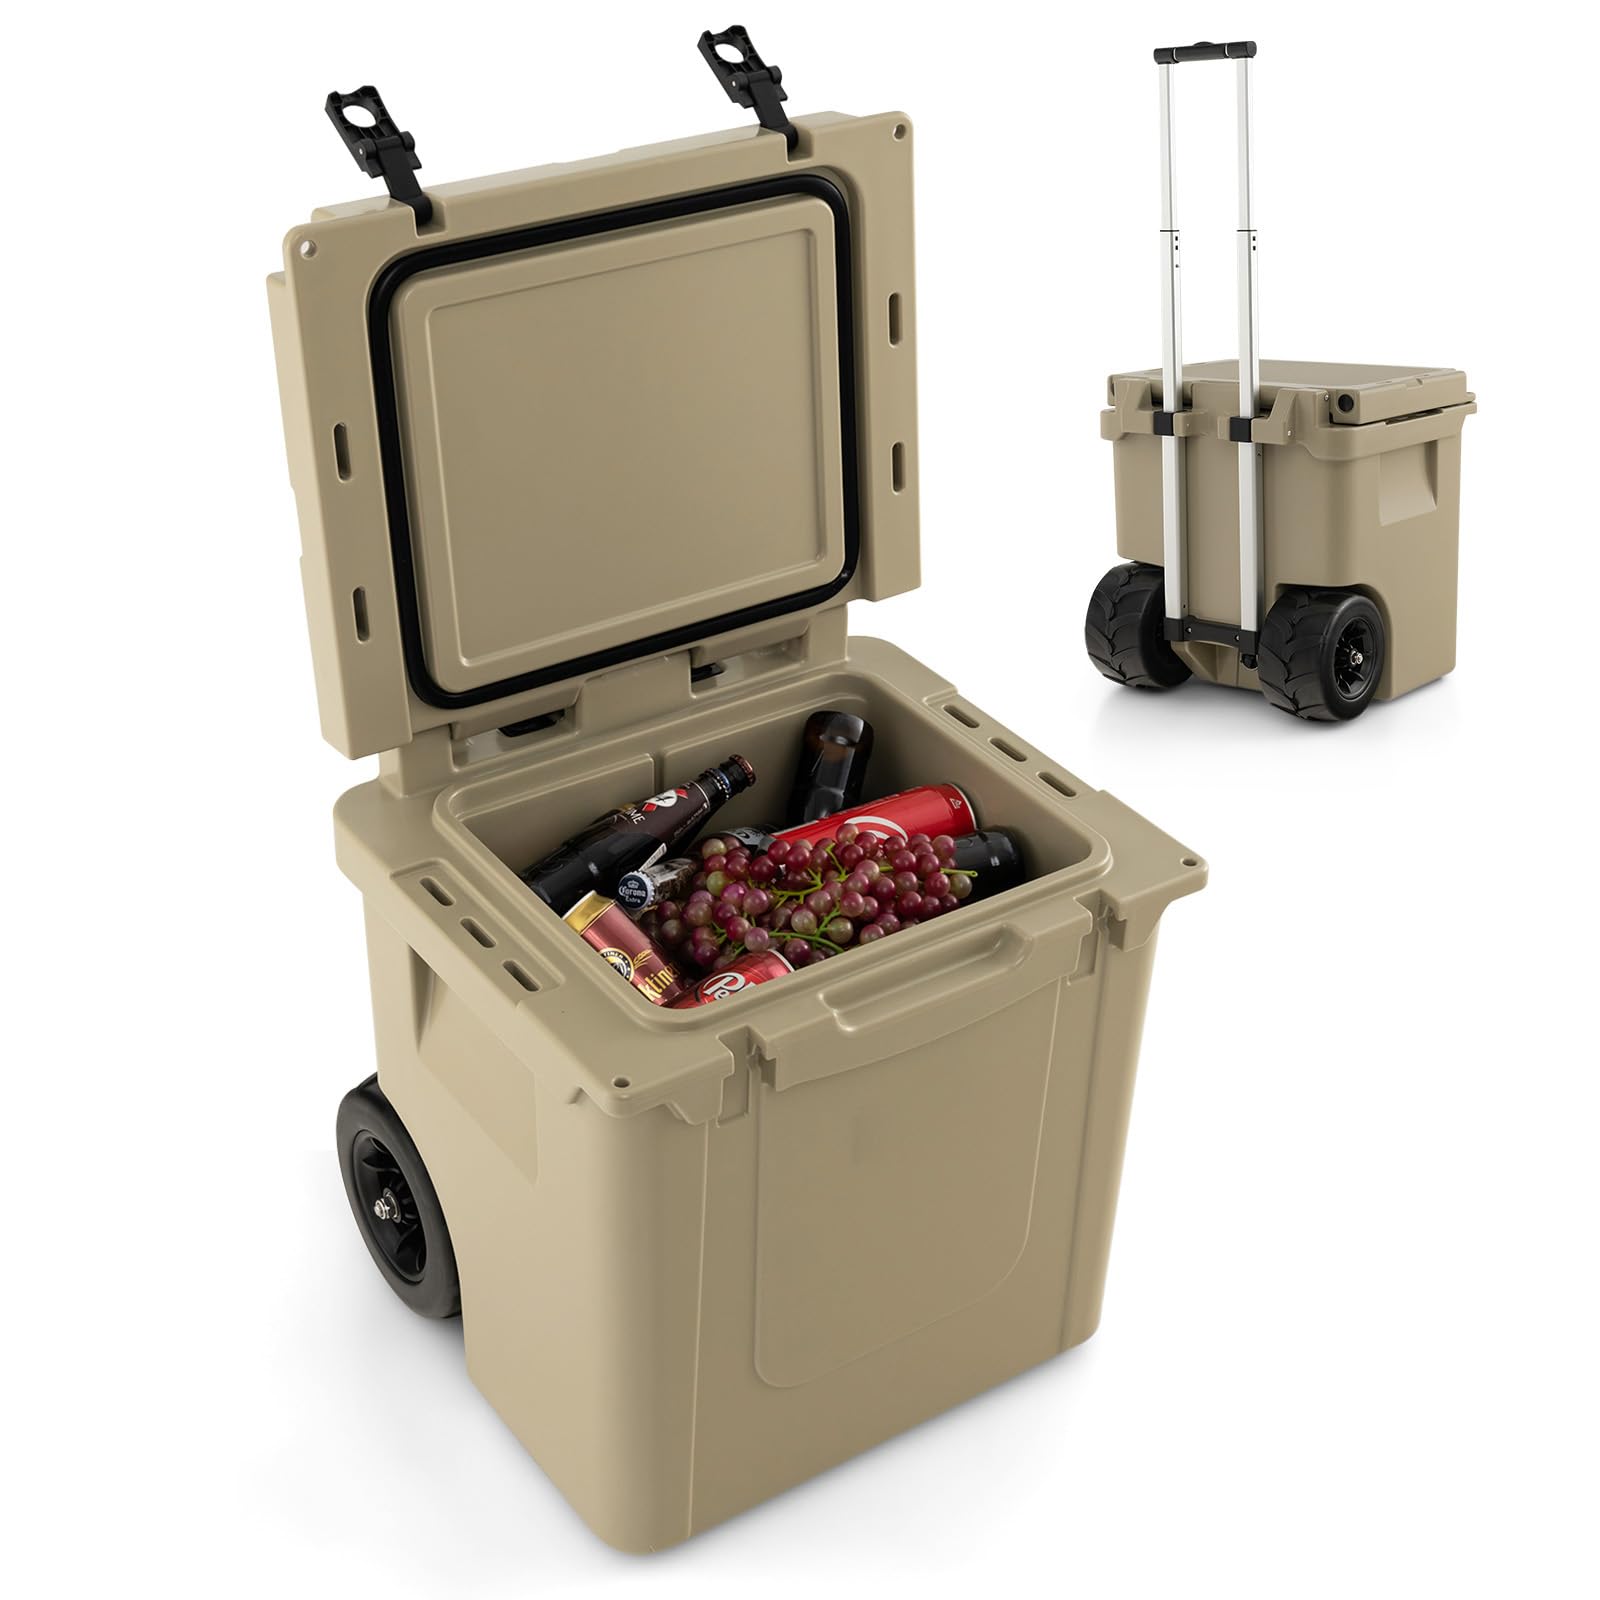 Giantex Cooler with Wheels, 45 Quart Rolling Cooler with All Terrain Wheels